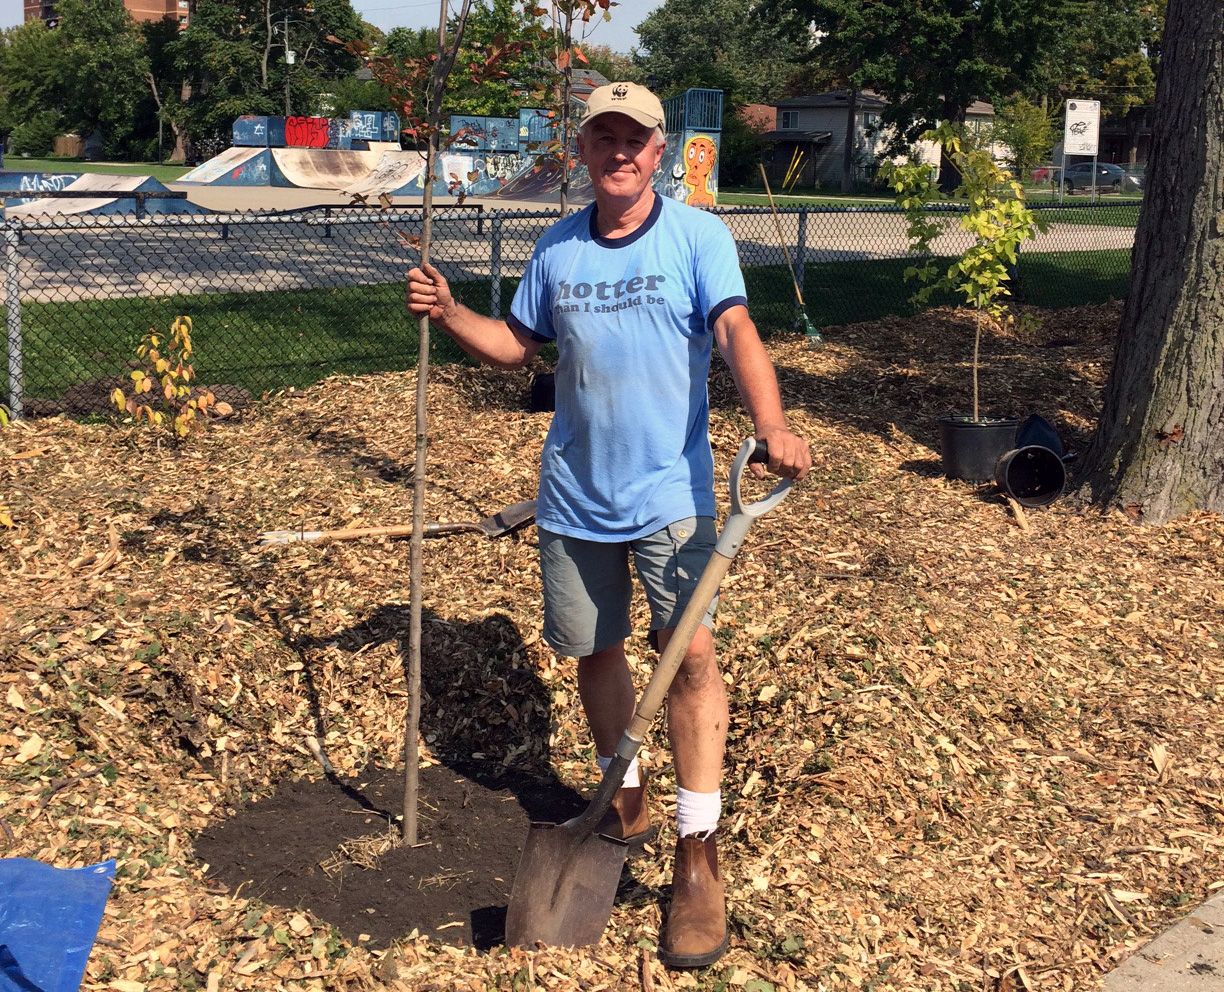 Peter Ewins of Project Swallowtail holding a newly planted tree and a shovel